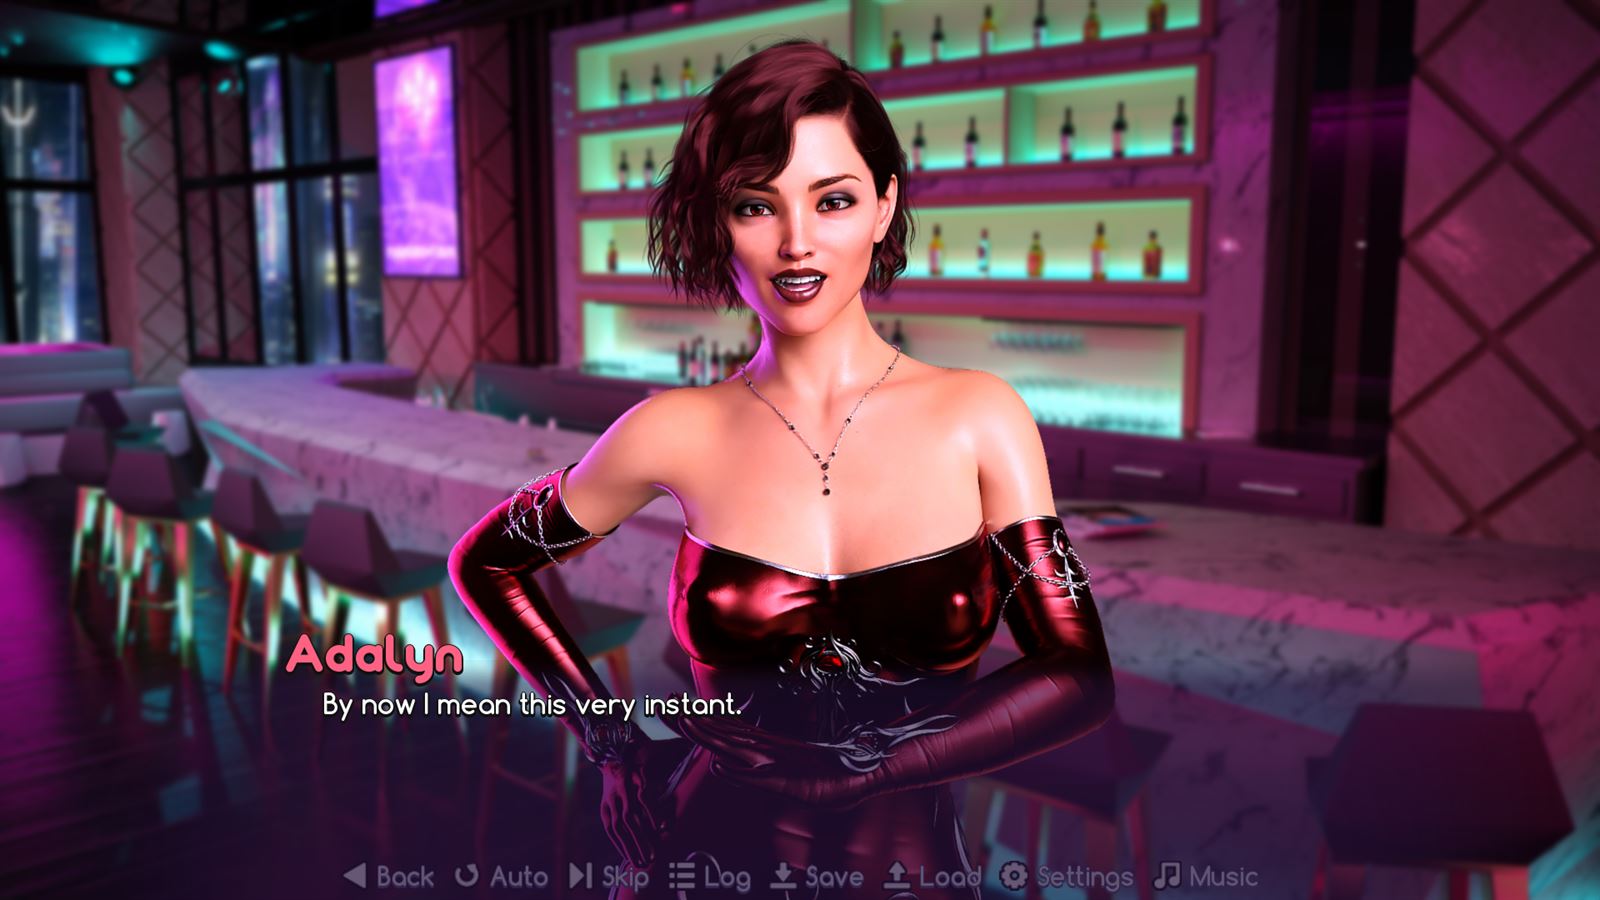 Dawnbreaker - Aeon’s Reach is an erotic visual novel that puts you in the h...